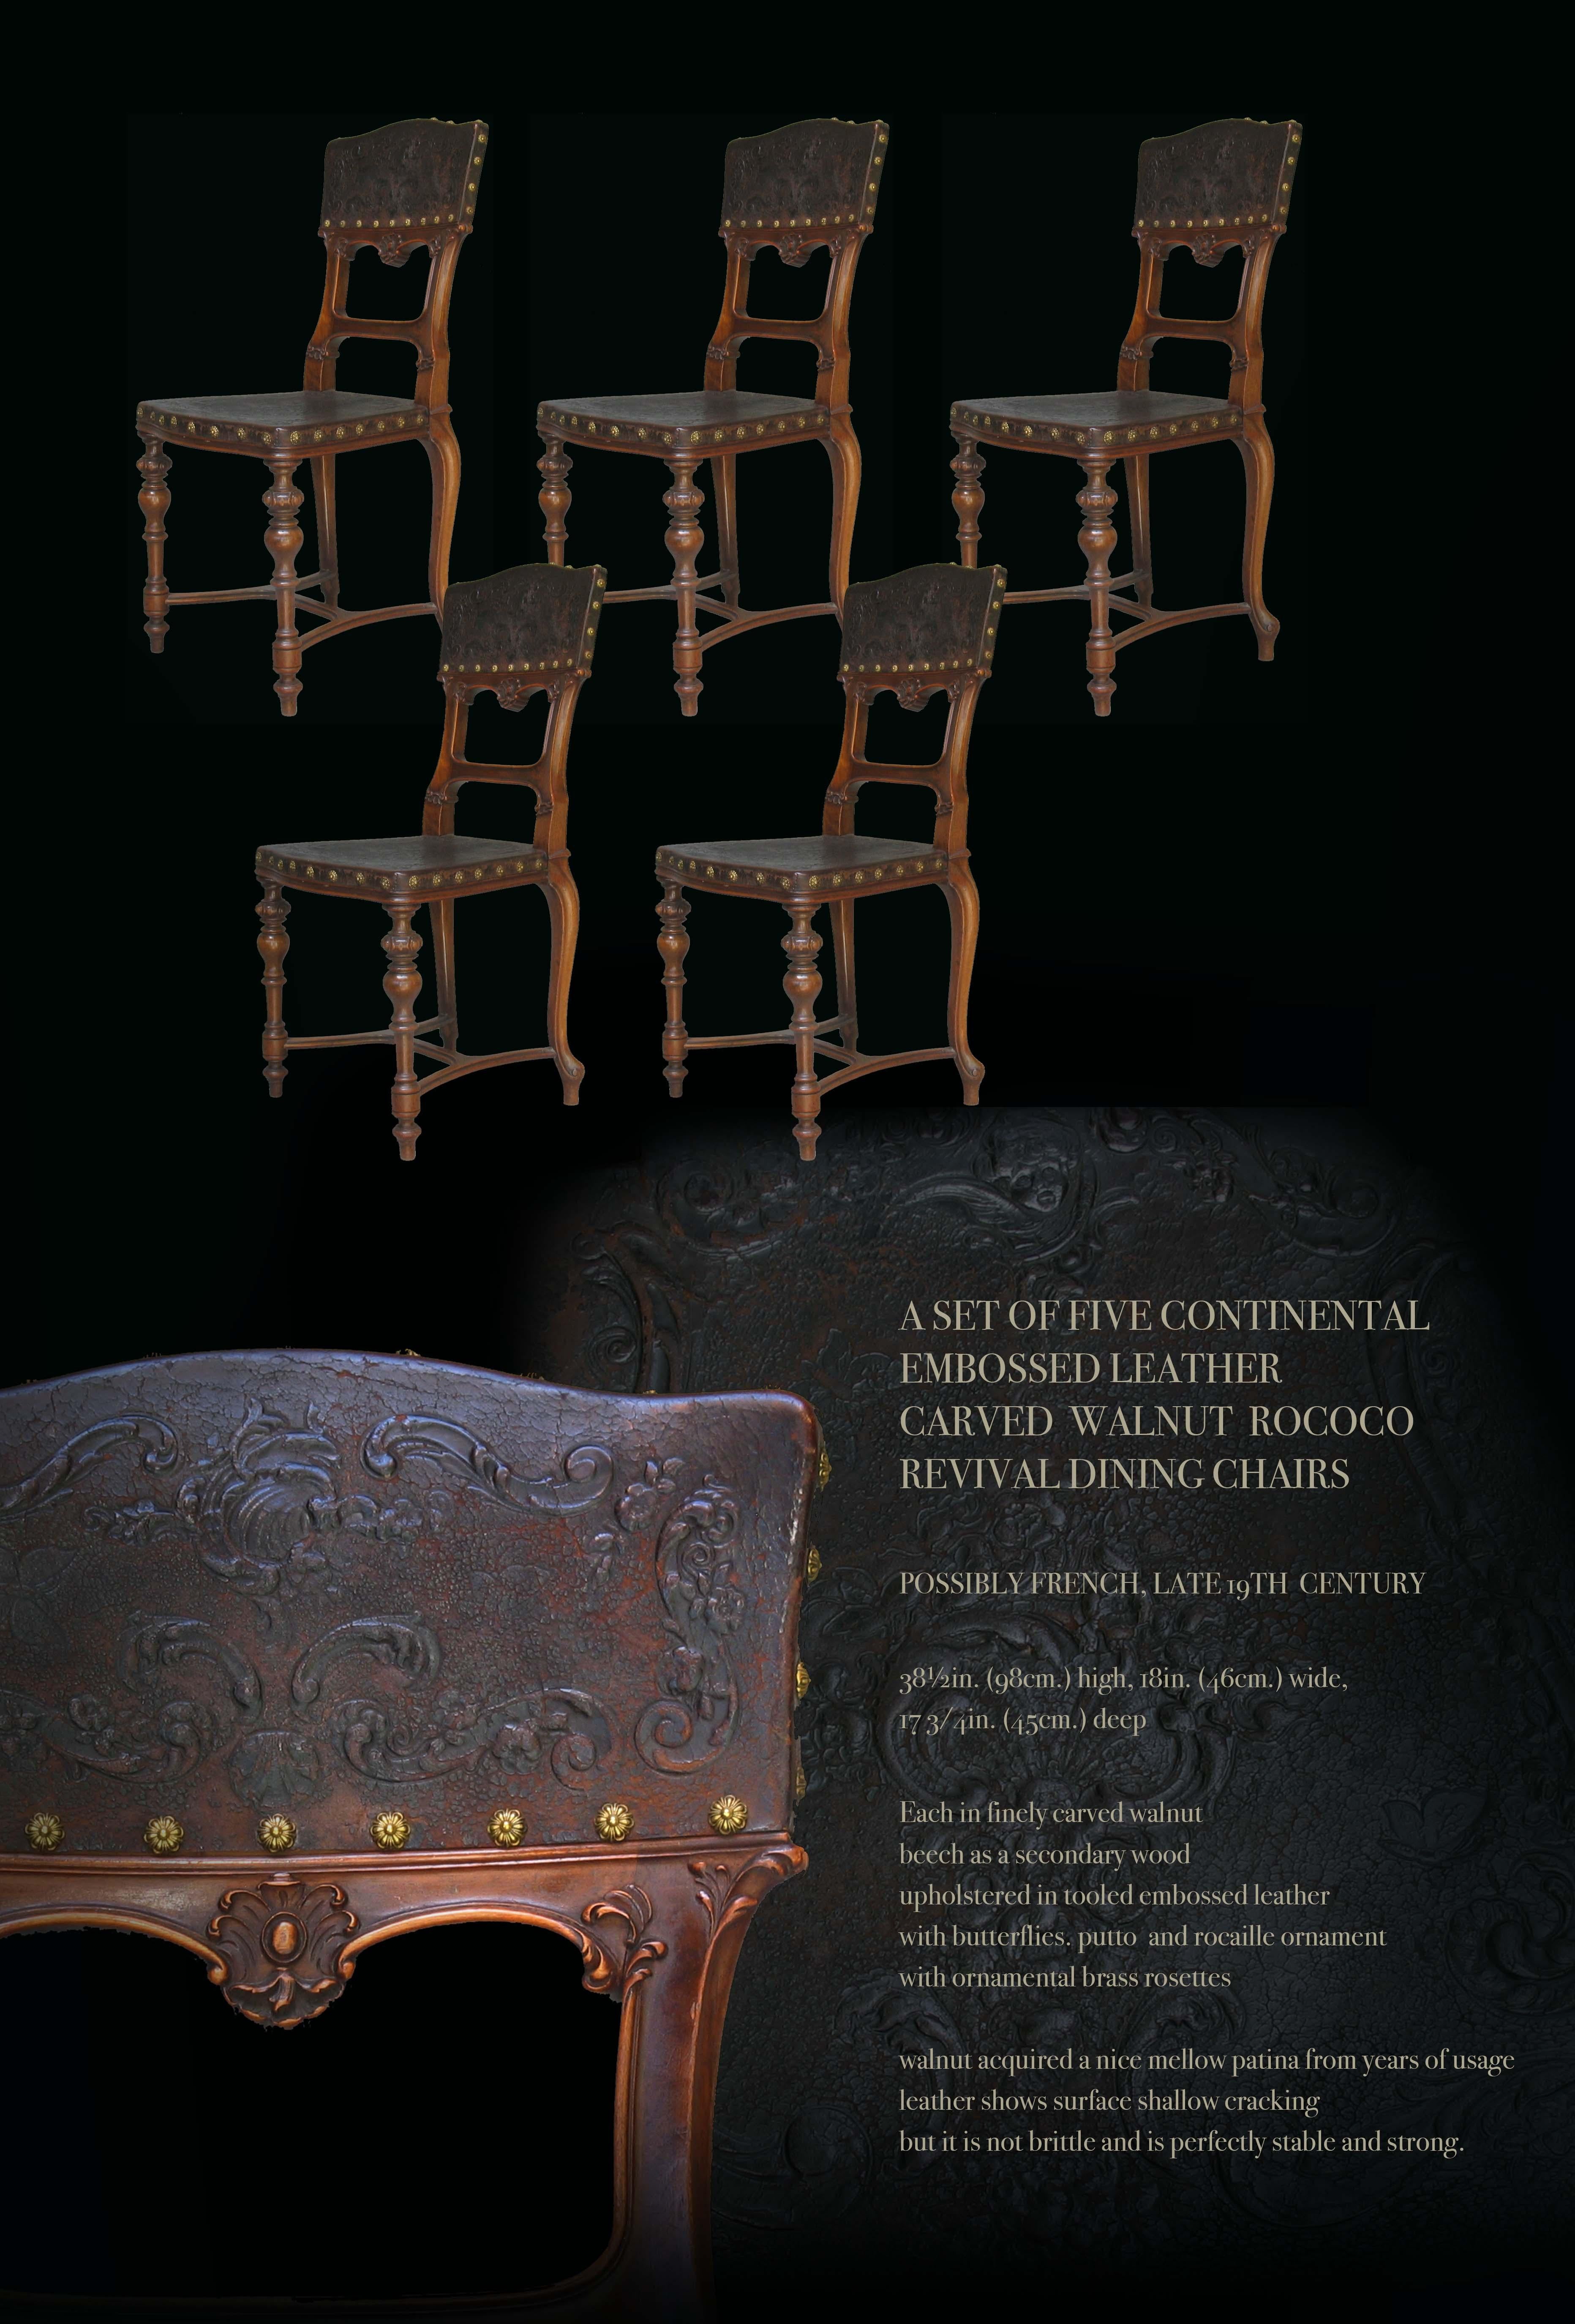 A SET OF FIVE CONTINENTAL
EMBOSSED LEATHER
CARVED WALNUT ROCOCO
REVIVAL DINING CHAIRS

POSSIBLY FRENCH,  LATE 19TH CENTURY

38½